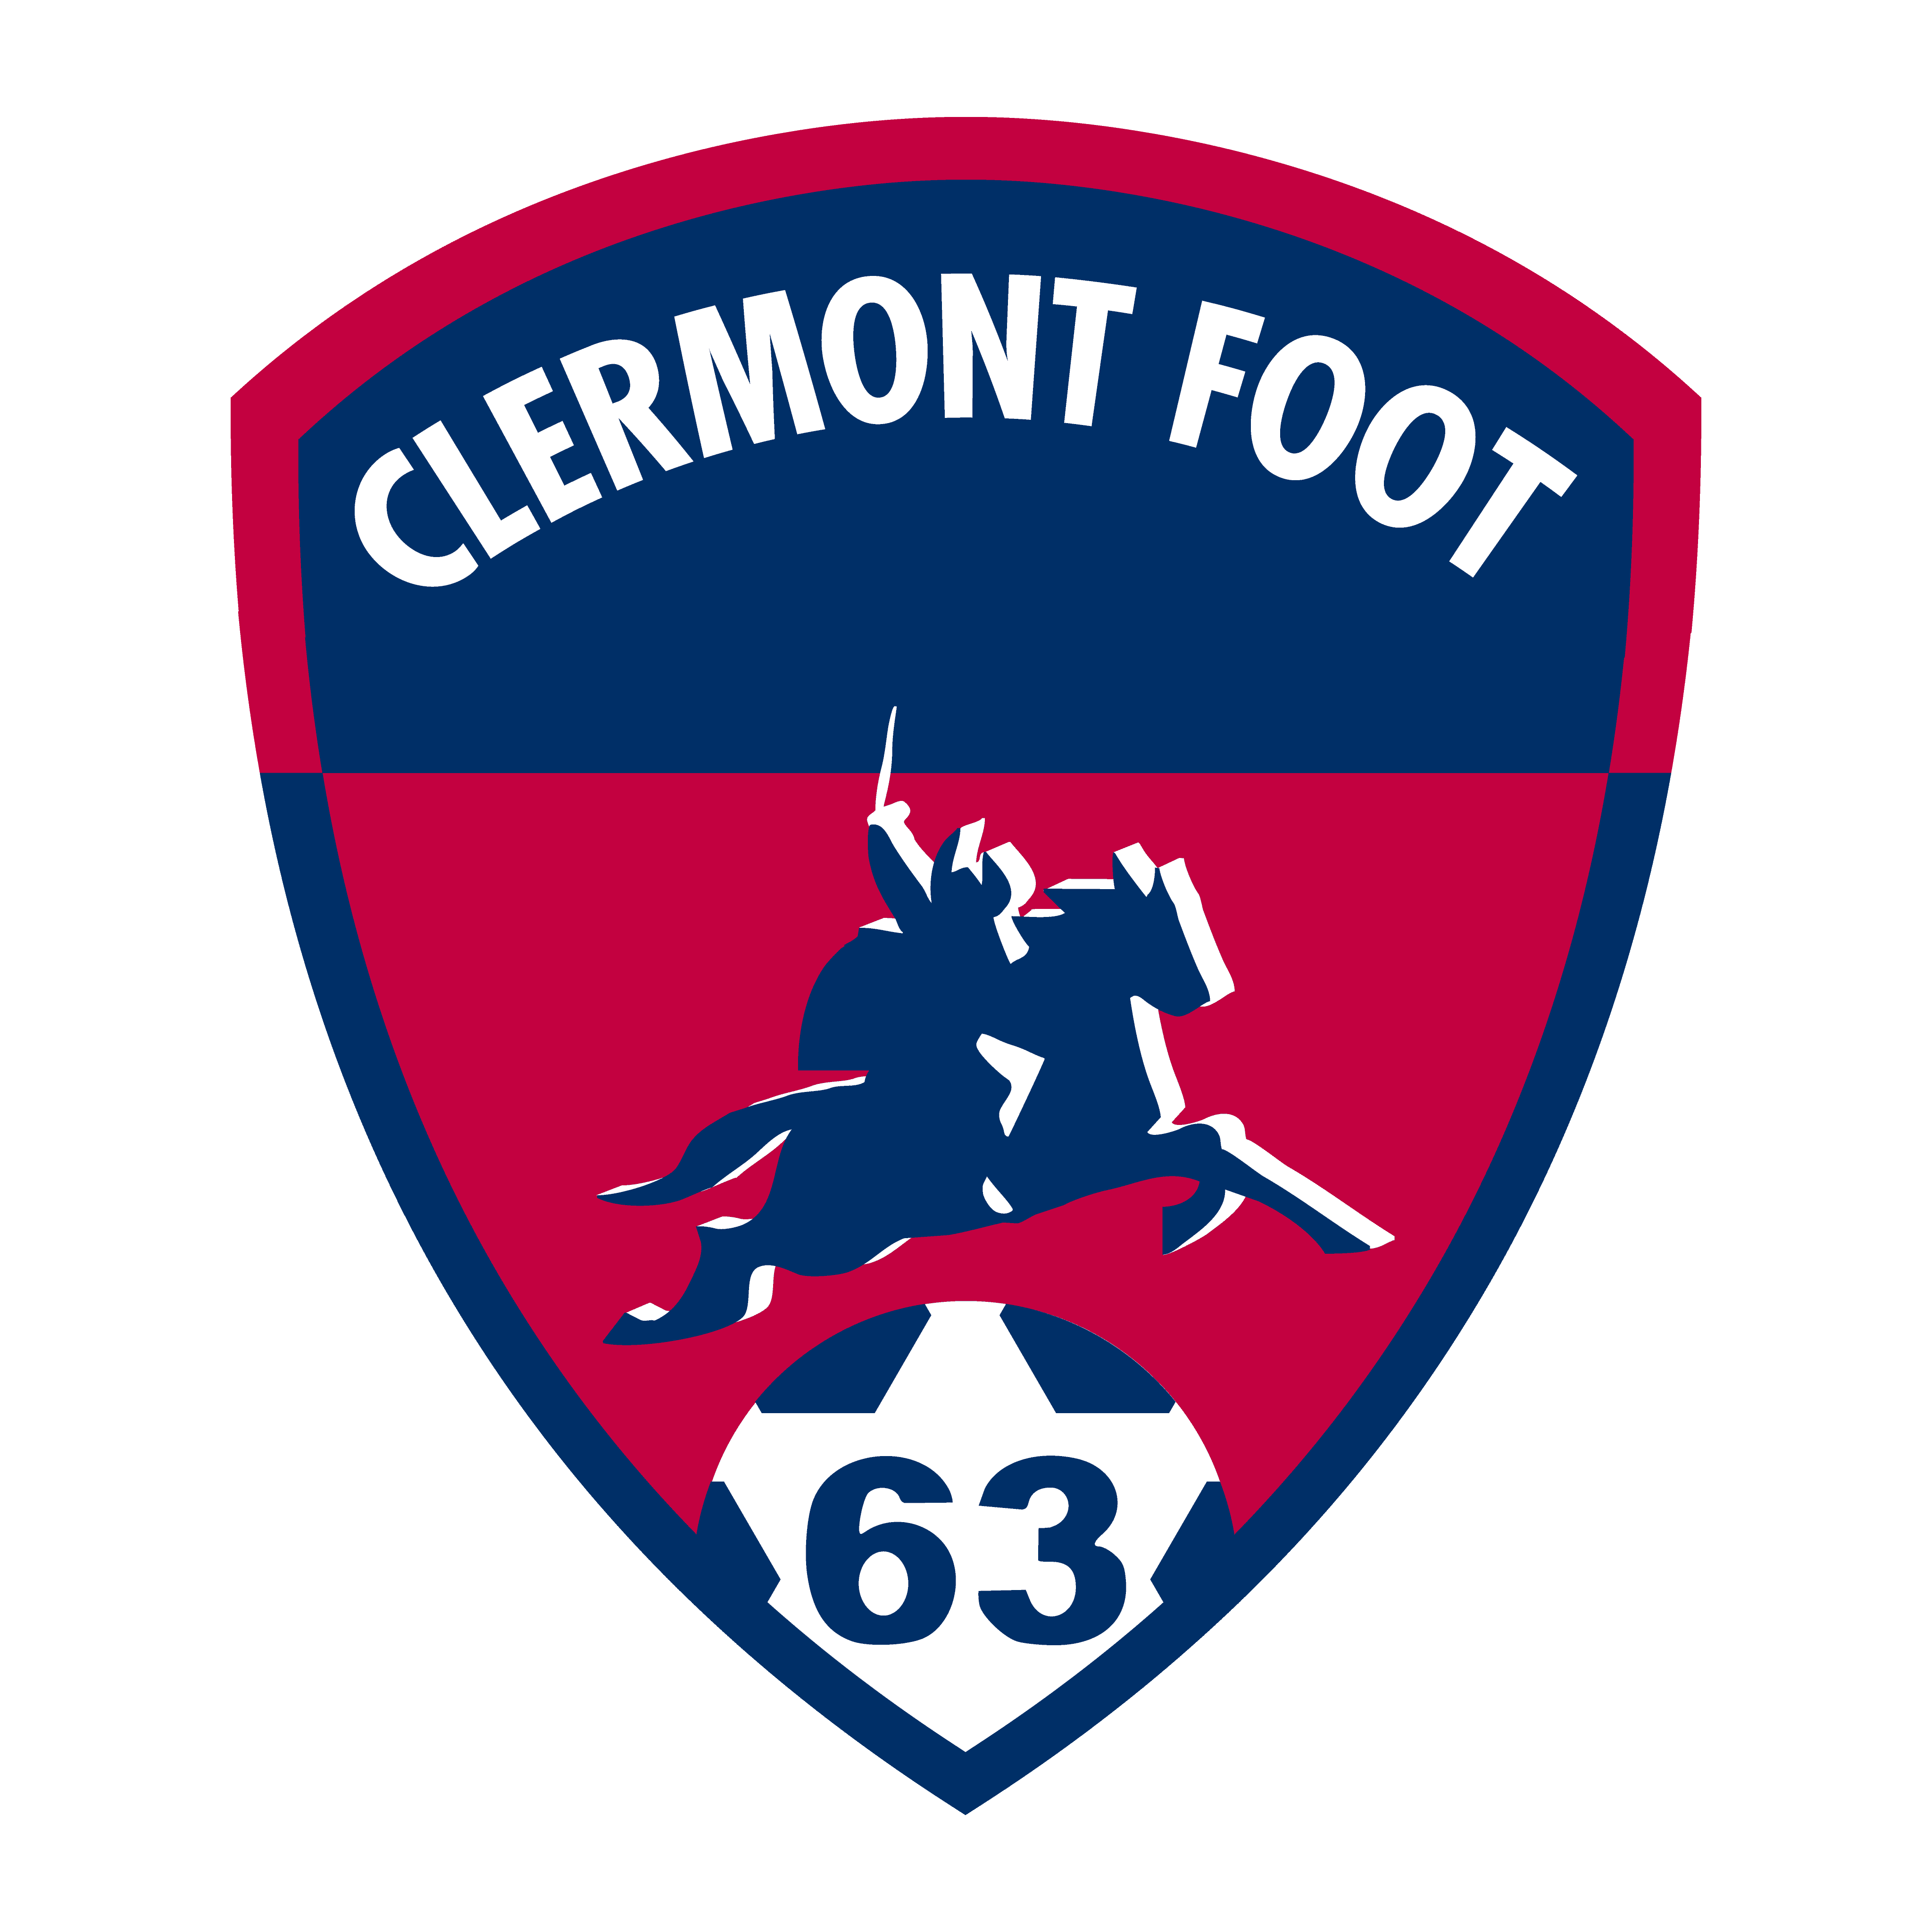 logo clermont foot 63